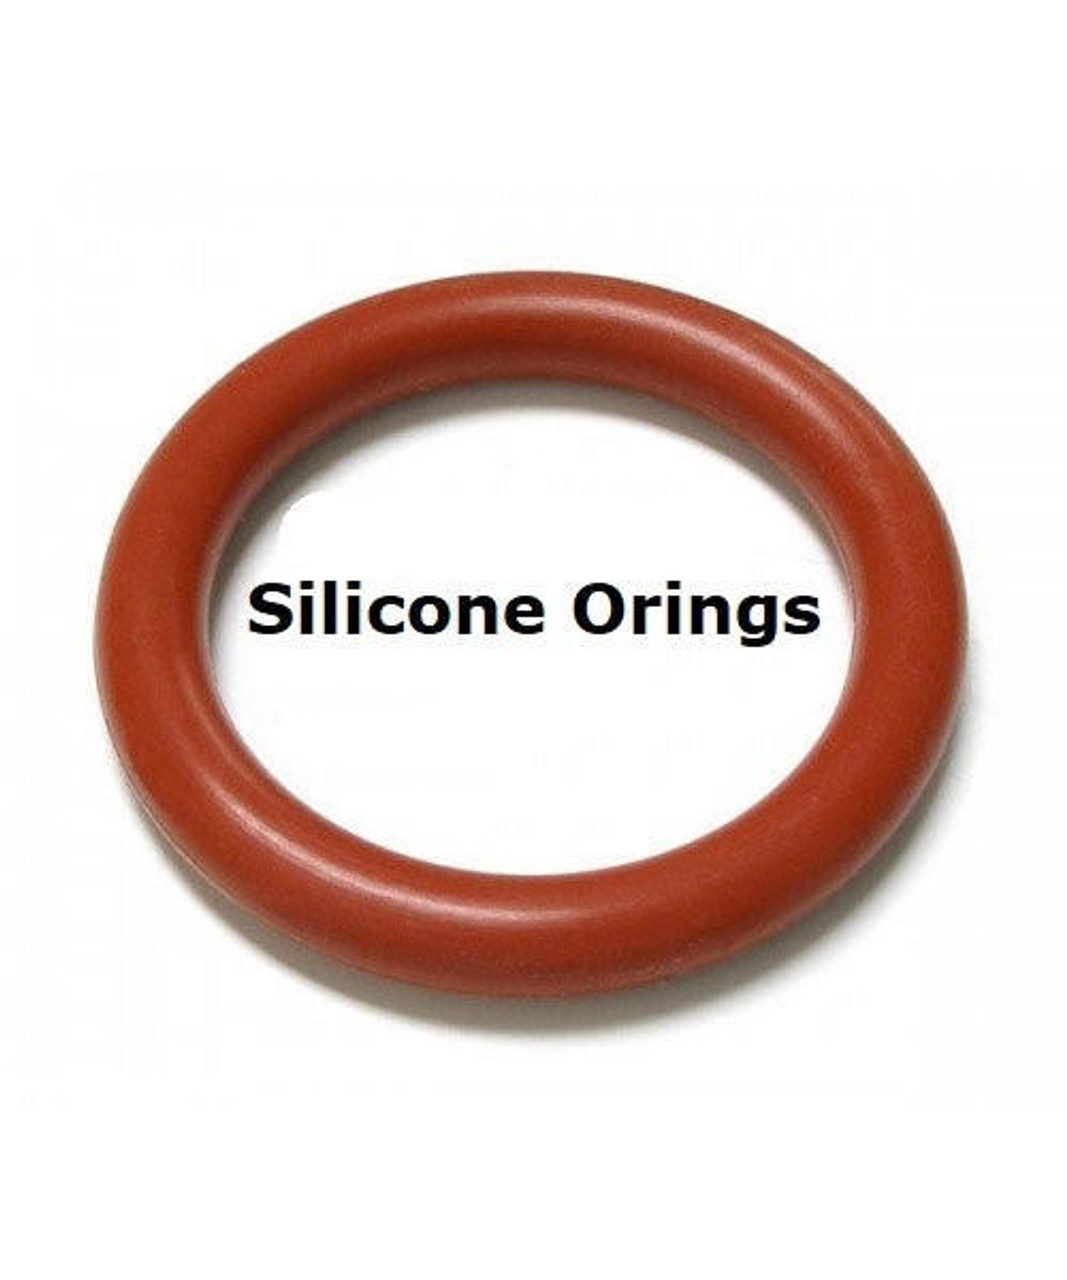 Silicone O-rings Size 342 Price for 1 pc